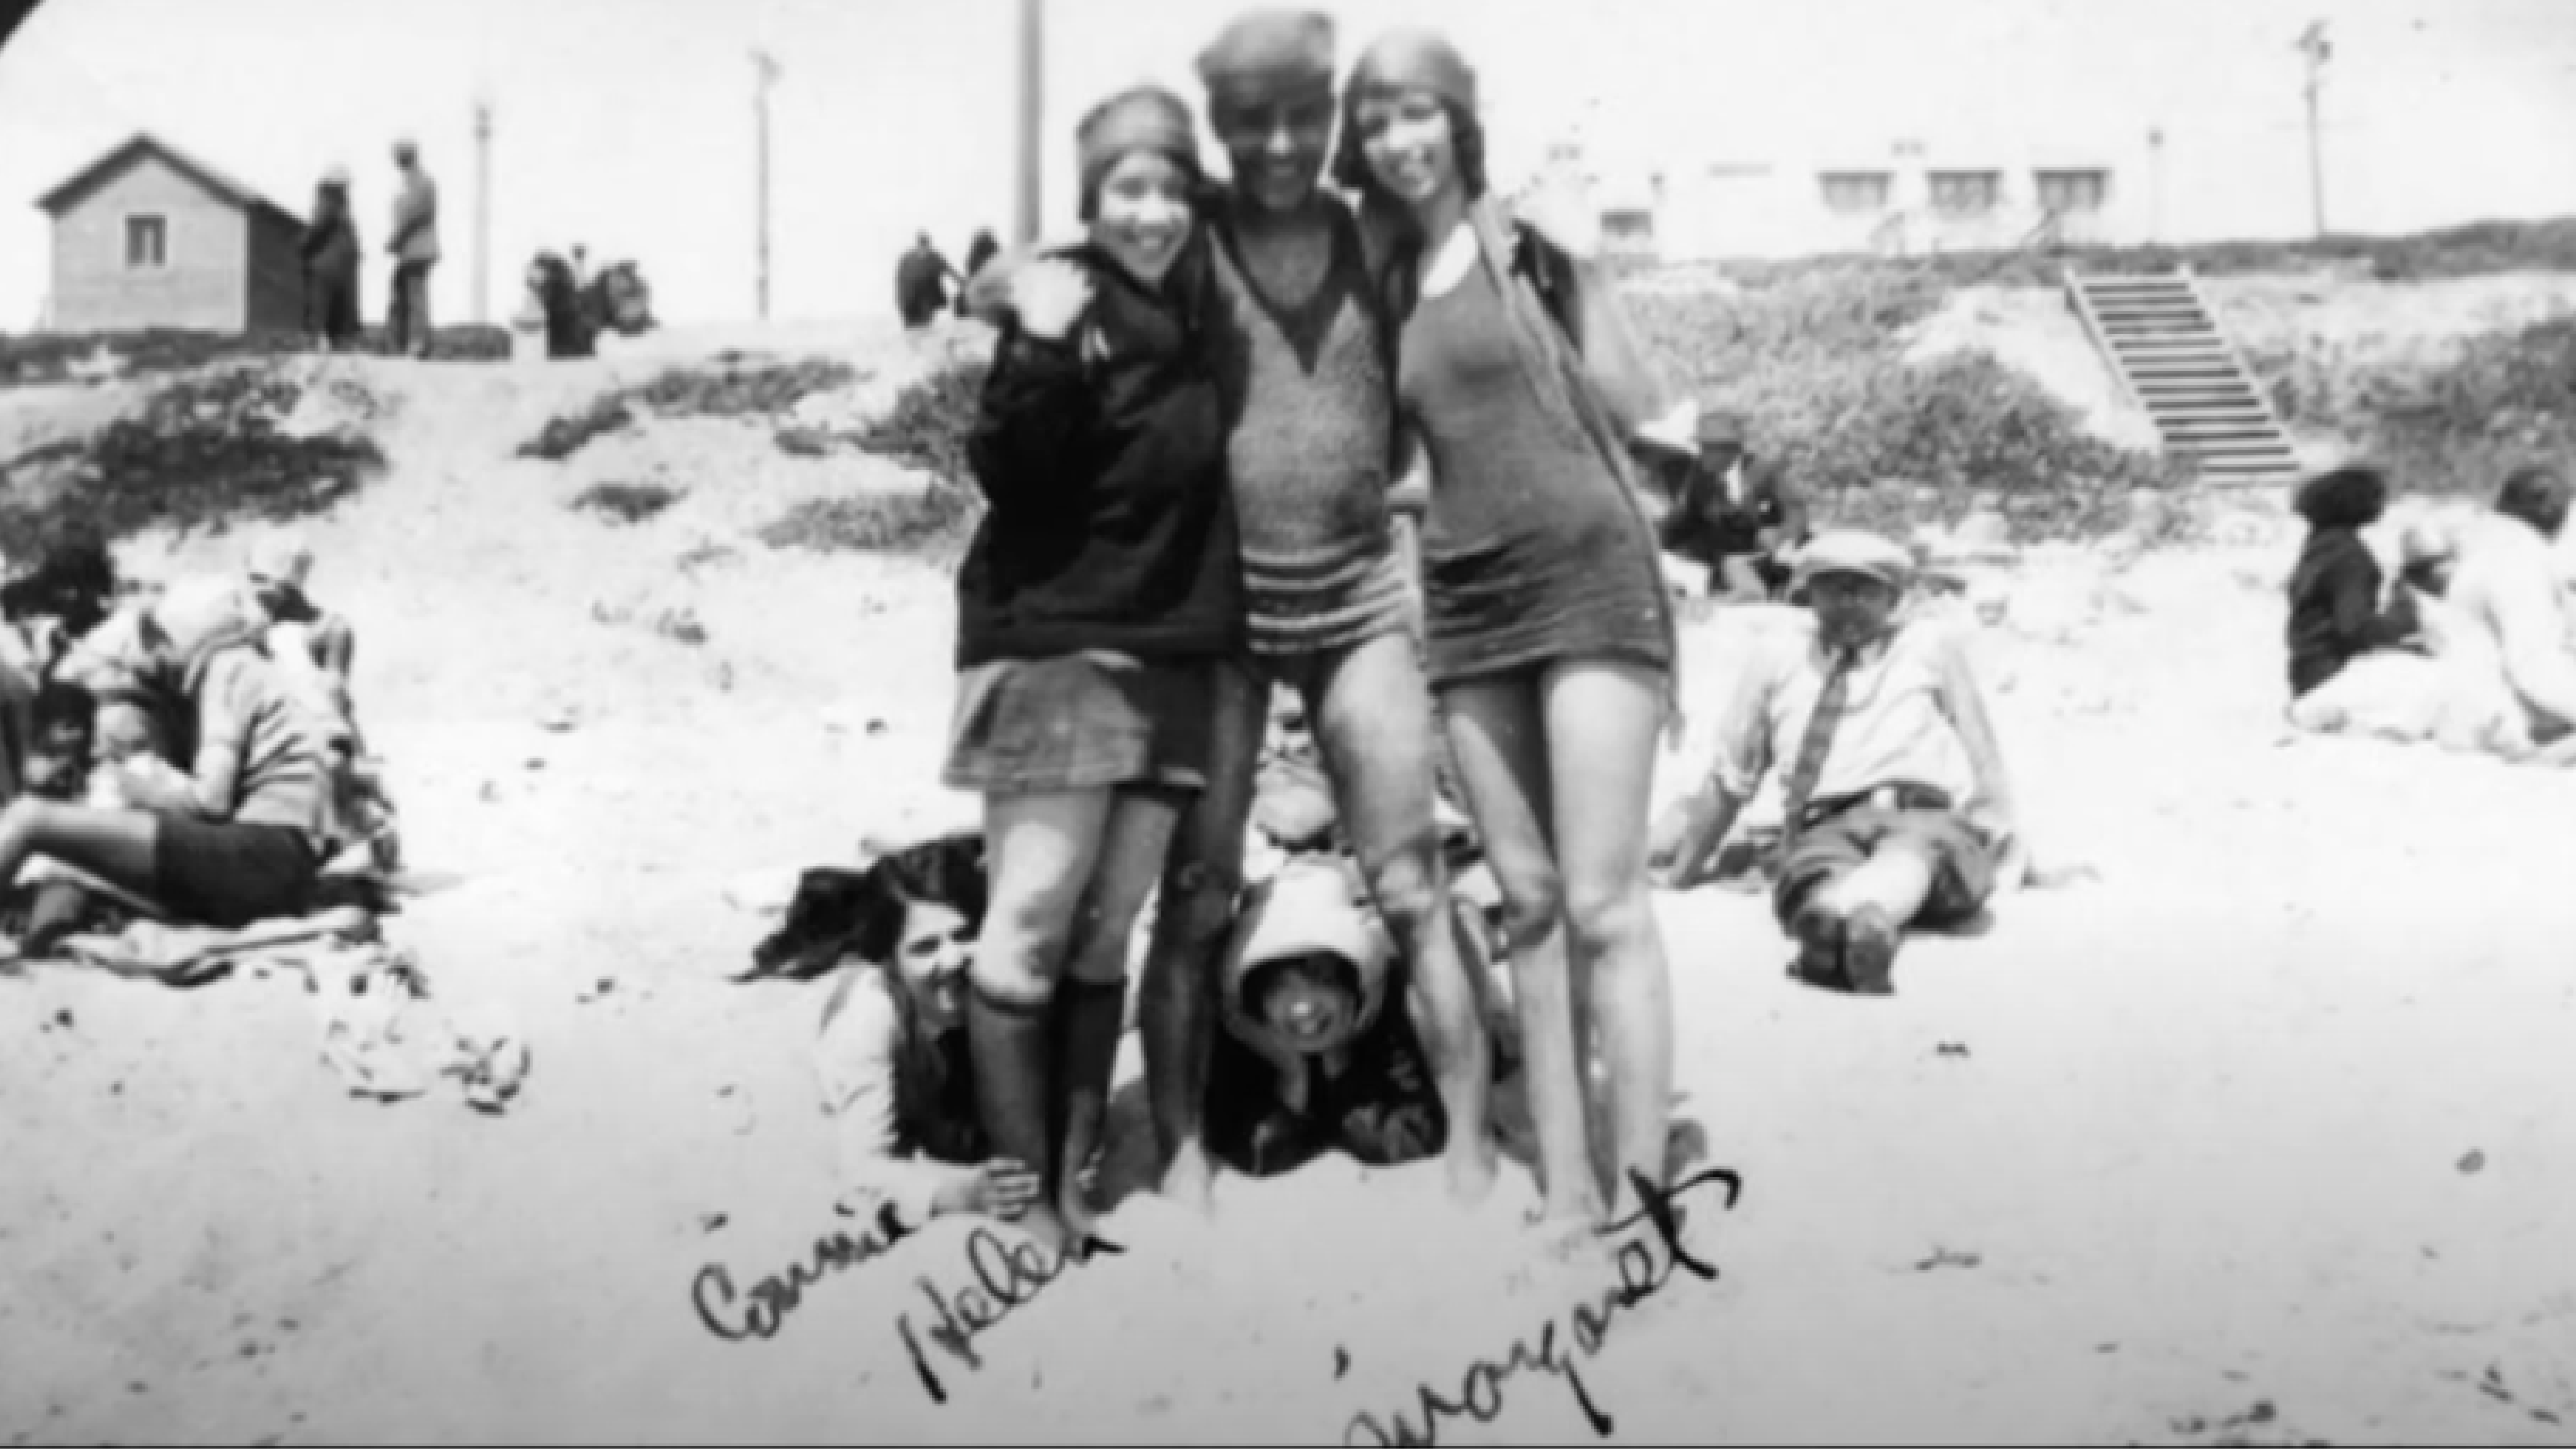 Photo of a group African Americans from the 1900s — 1960s finding leisure and community in a stretch of Santa Monica beach around Bay Street sometimes called “The Inkwell”.